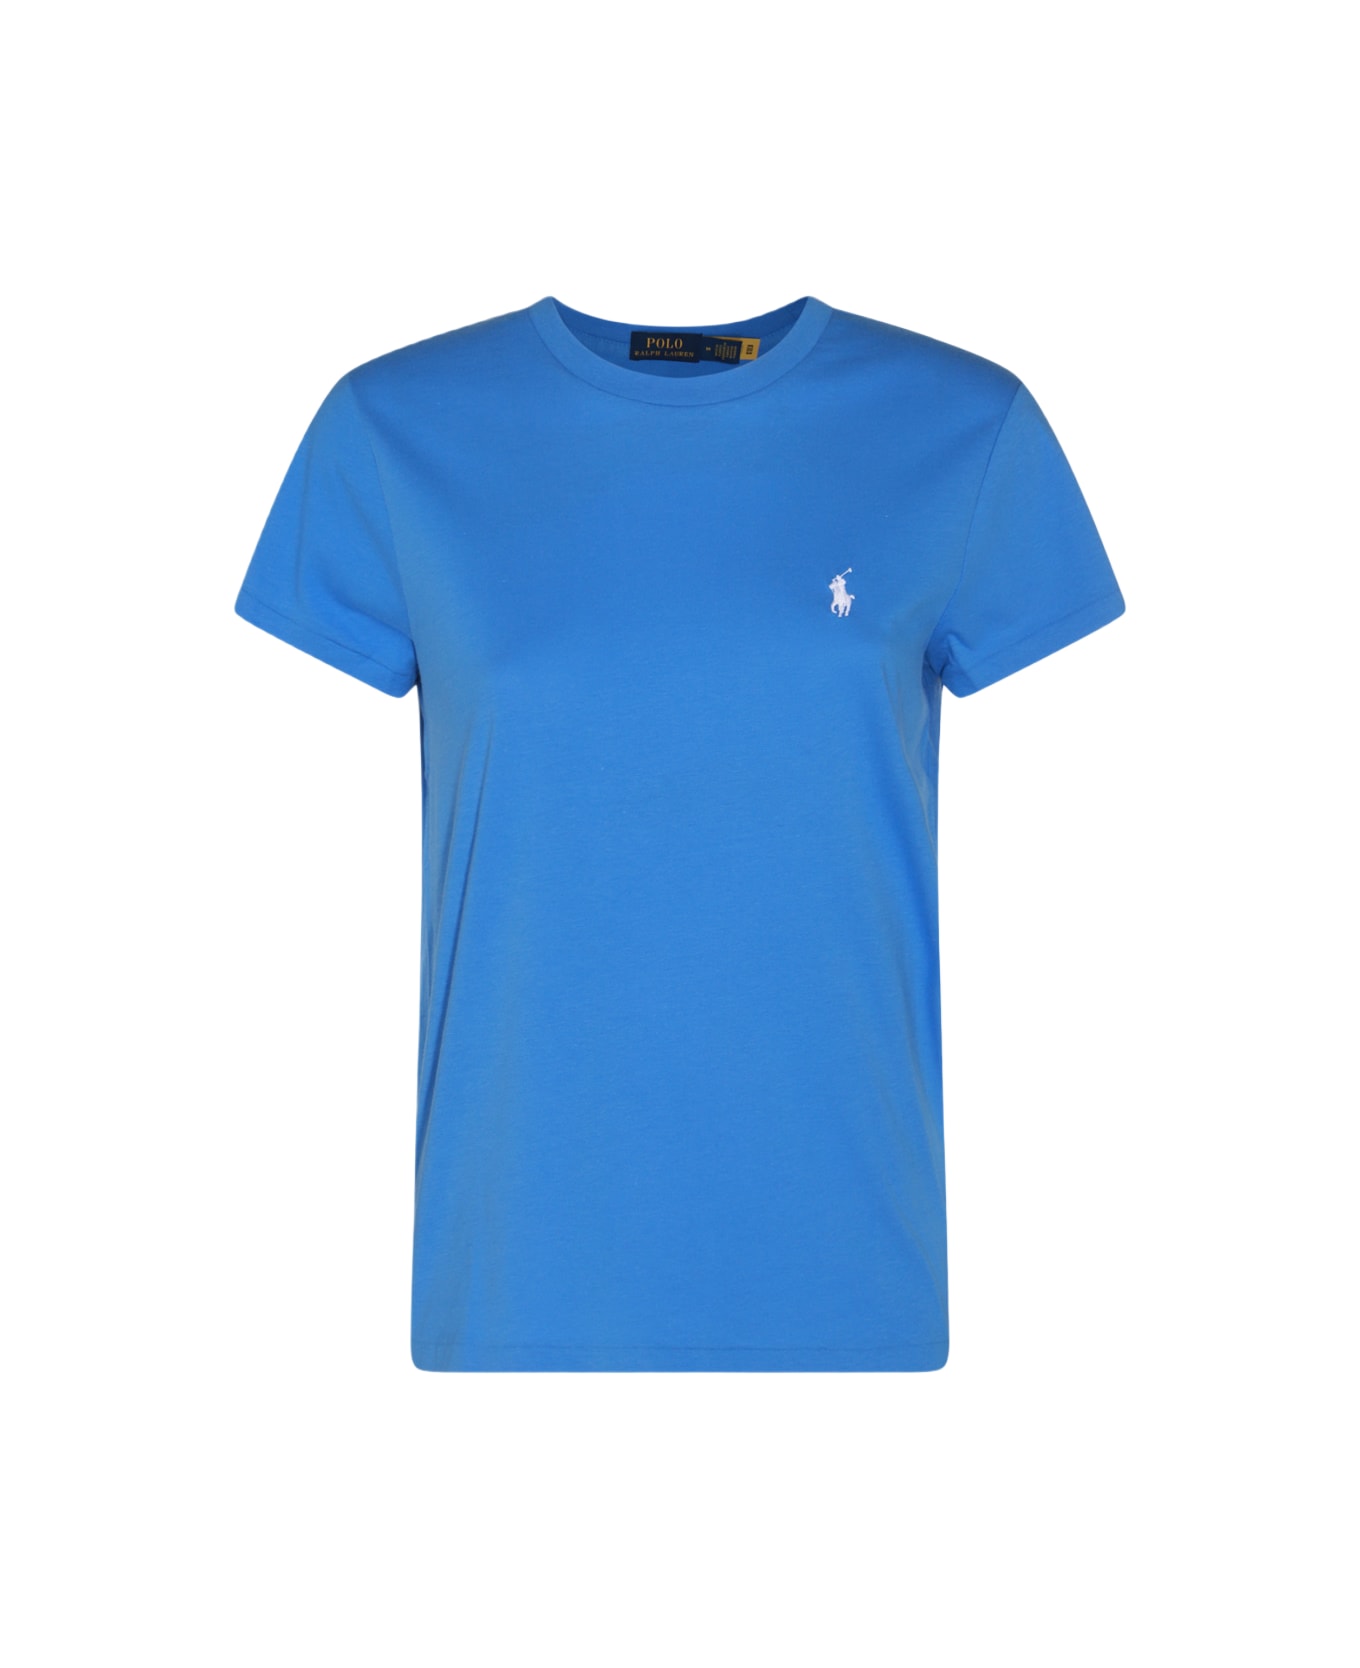 Polo Ralph Lauren Cobalt Blue And White Cotton T-shirt - COLBY BLUE Tシャツ